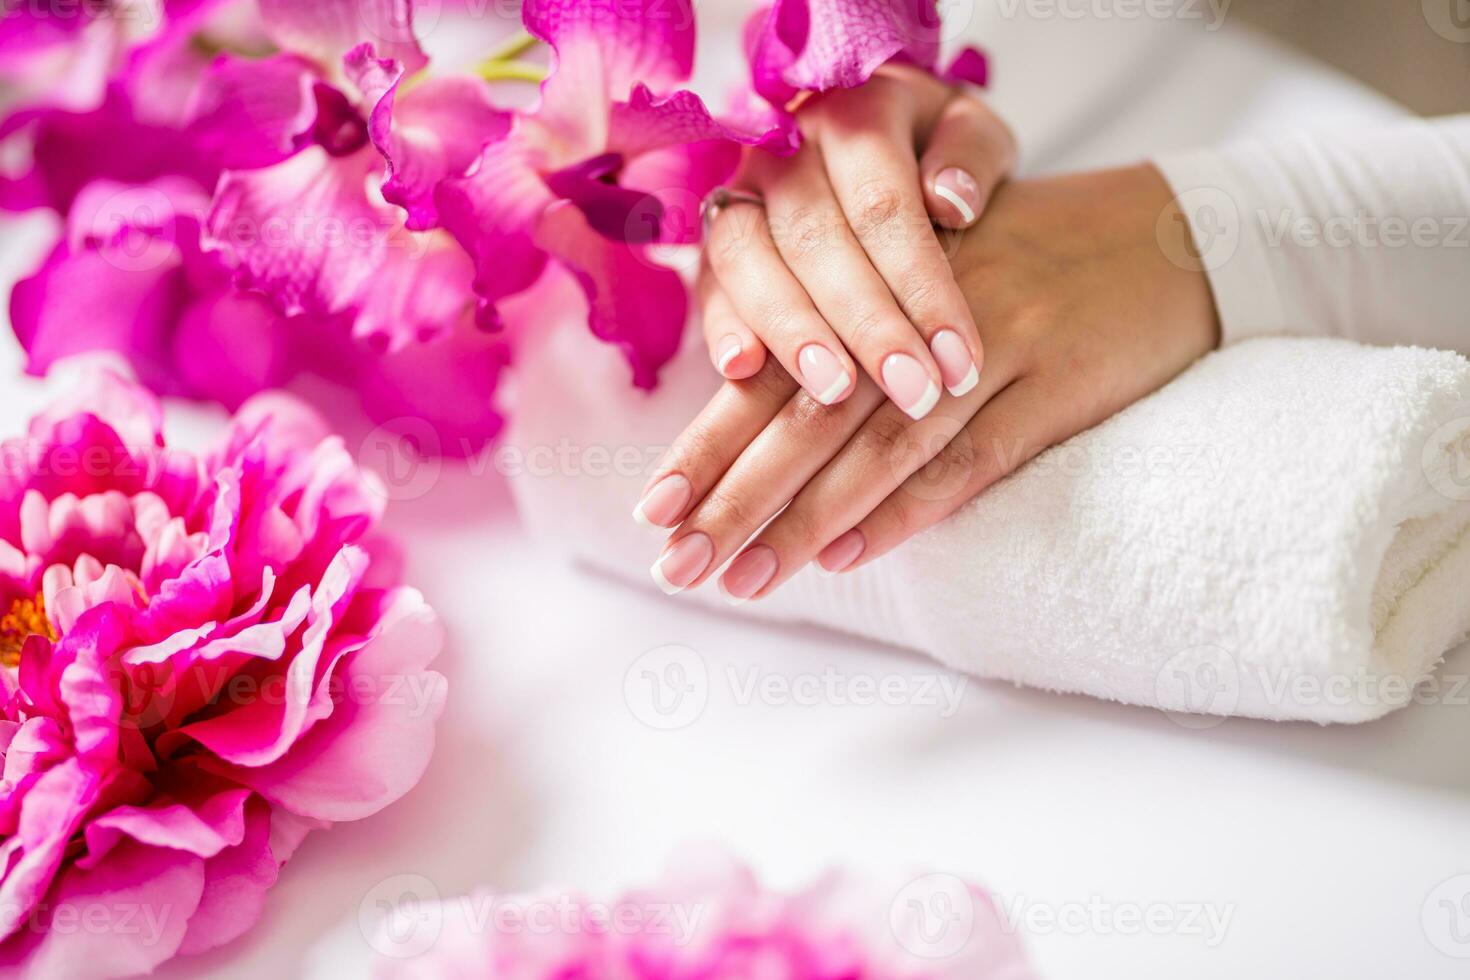 Closeup shot of beautiful female dands with nails of france manicure. Manicure and spa concept photo